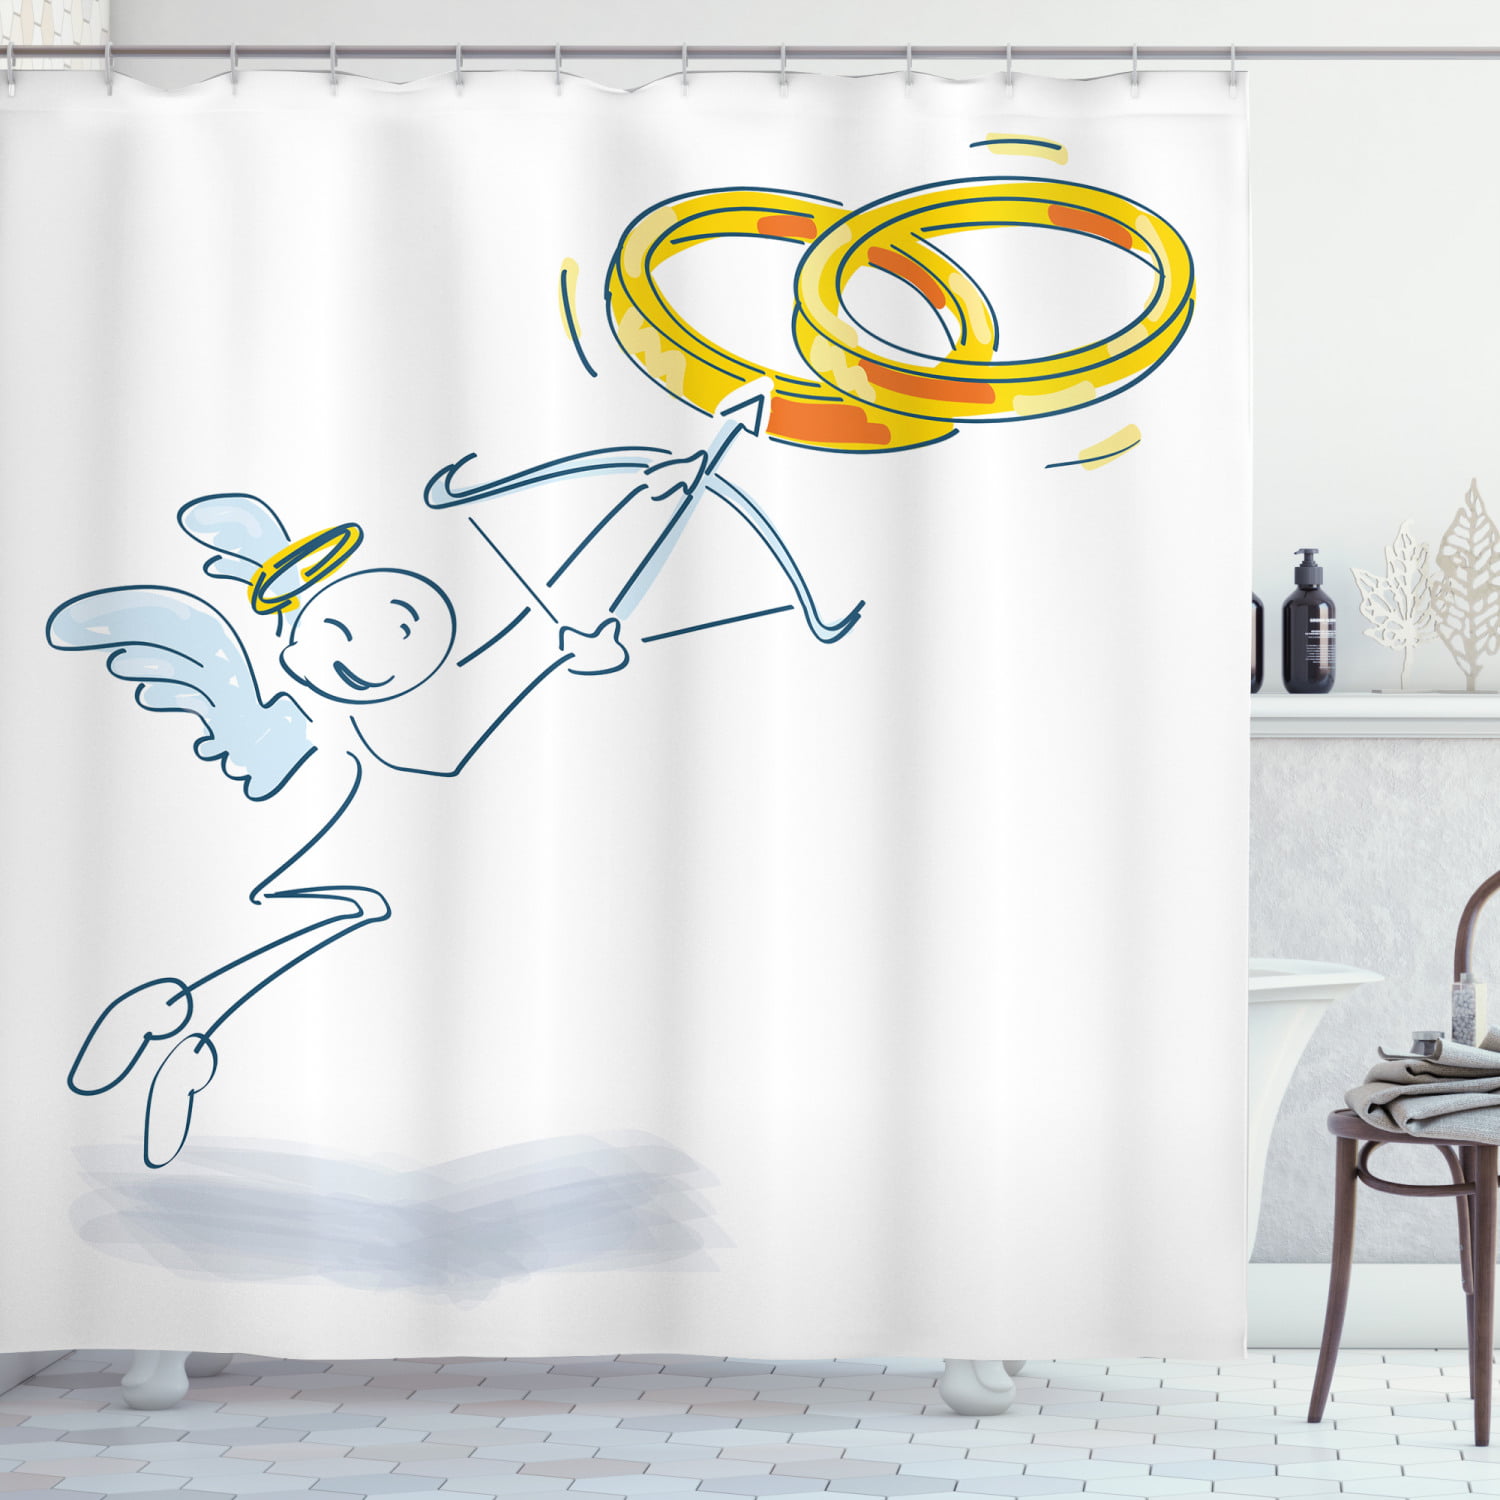 Engagement Party Shower Curtain, Amusing Design Cupid Stickman Shooting the Pair of Wedding Rings, Fabric Bathroom Set with Hooks, 69W X 70L Inches, Yellow and Baby Blue, by Ambesonne